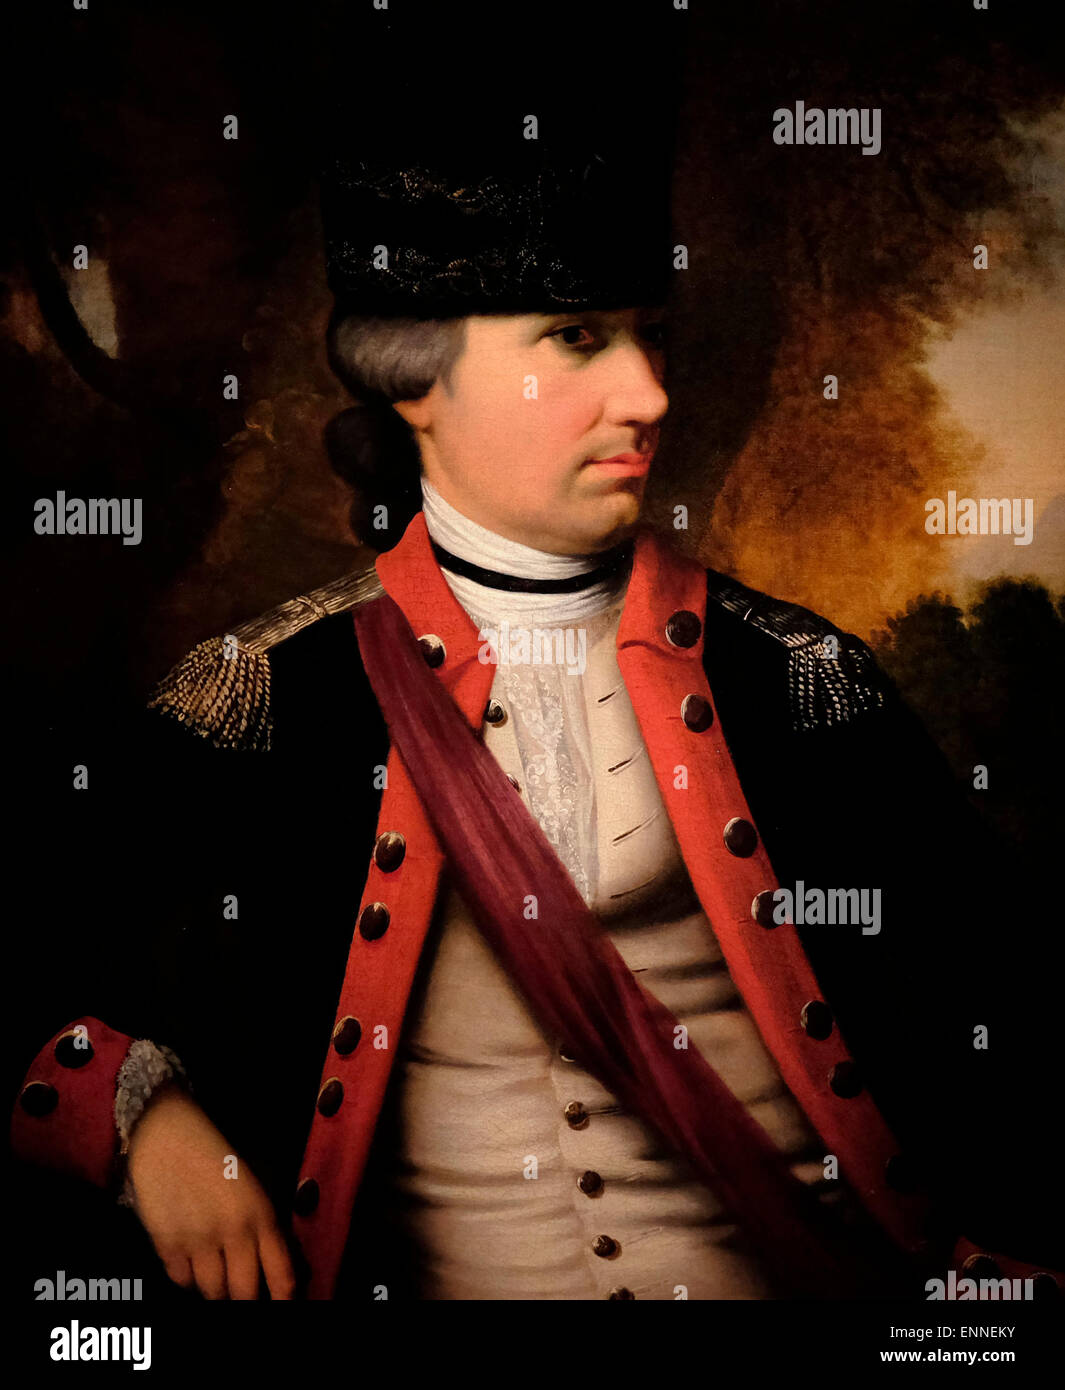 Charles Cotesworth Pinckney was a prominent South Carolina lawyer and planter, and the father of Governor Charles Pinckney., circa 1773 Stock Photo